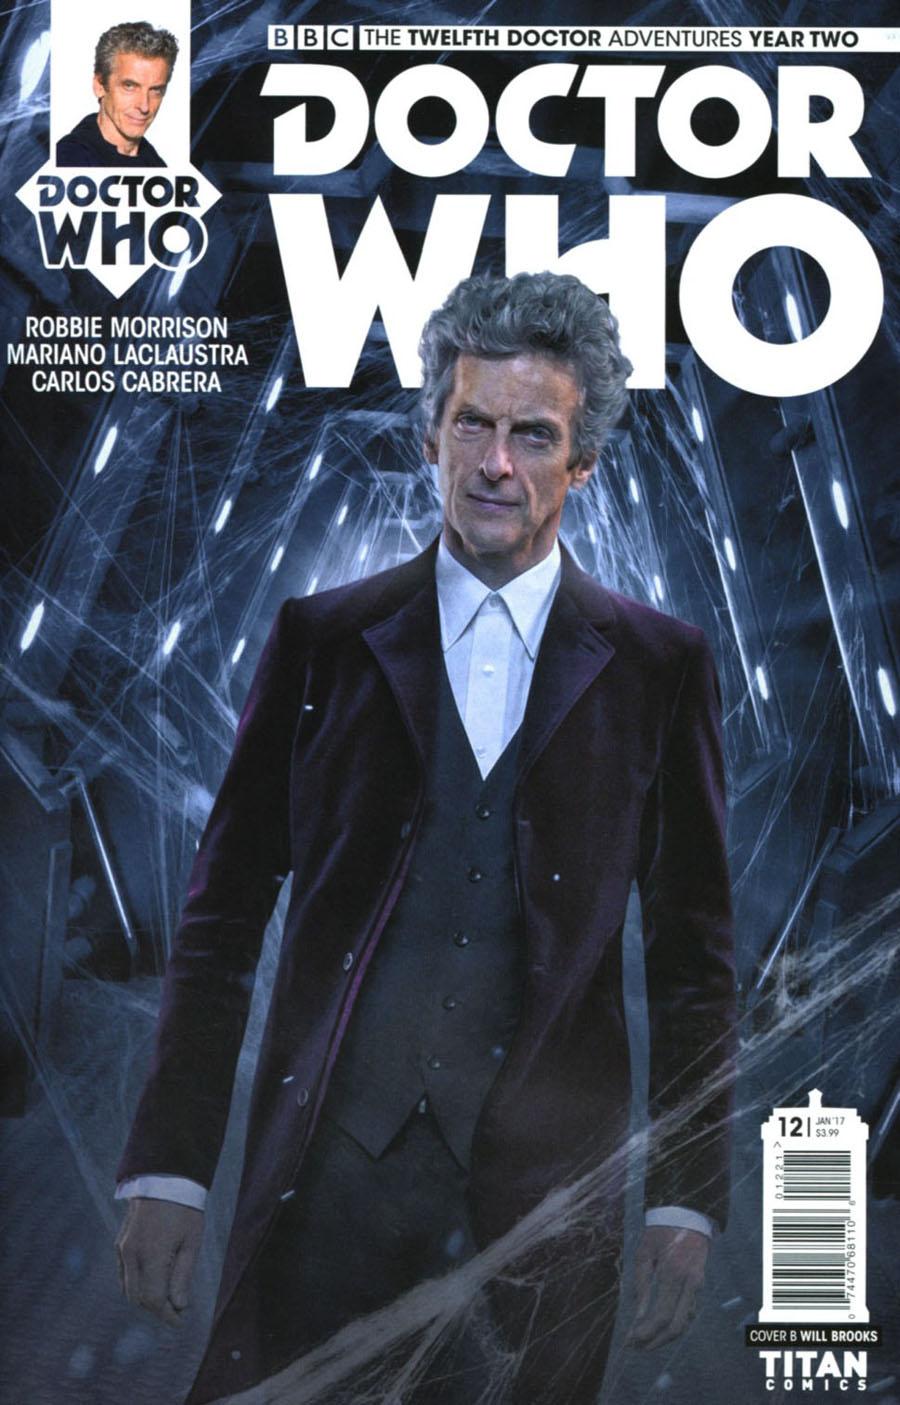 Doctor Who 12th Doctor Year Two Vol. 1 #12